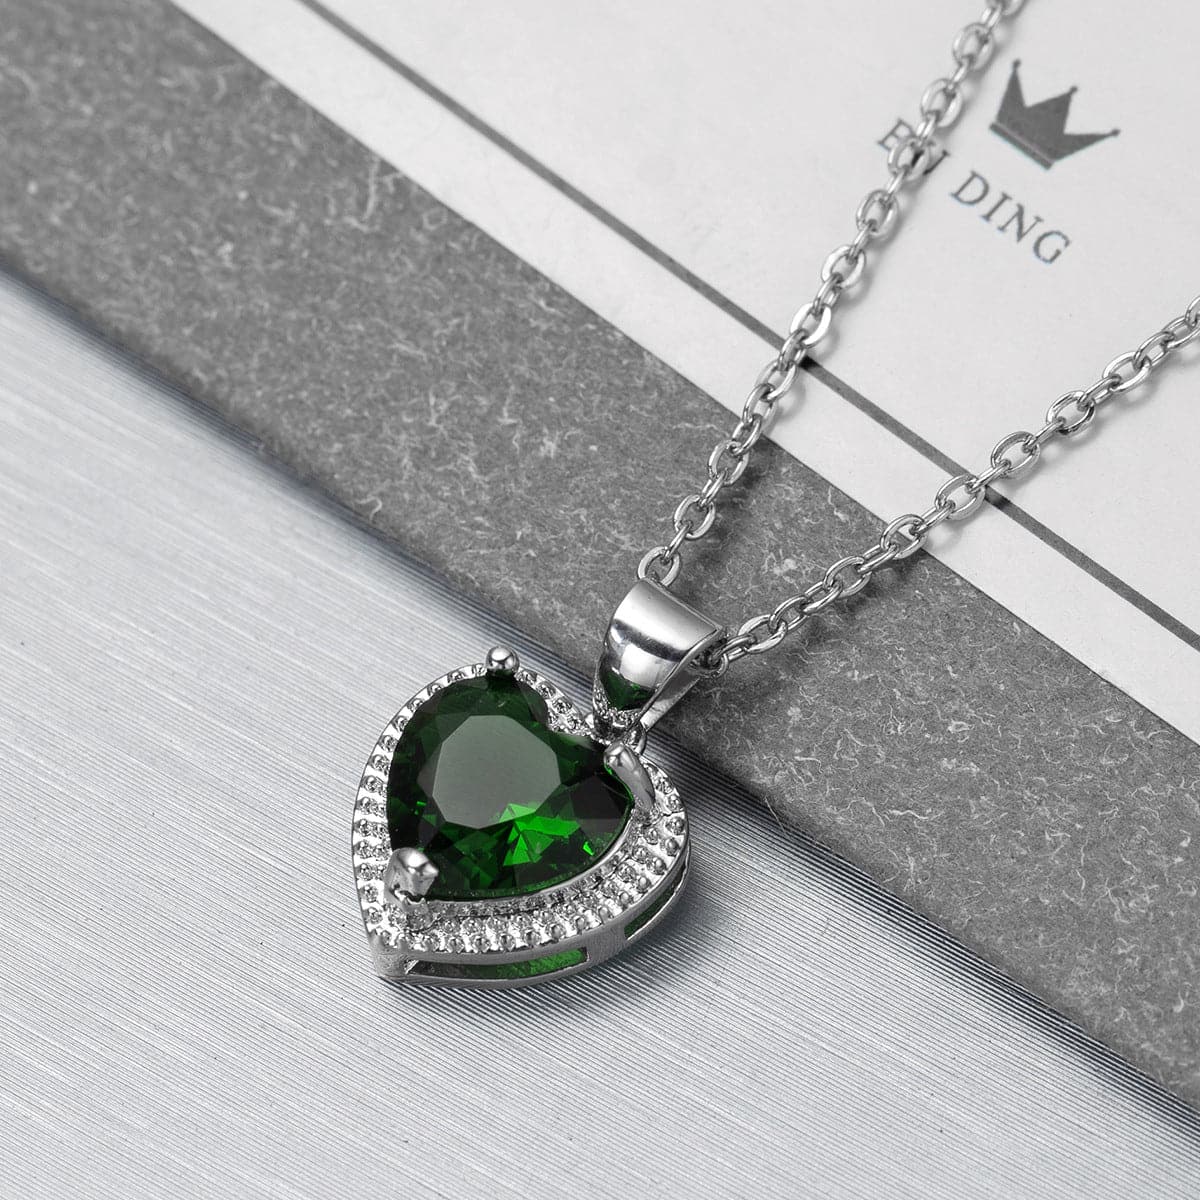 Green Crystal & Silver-Plated Heart Pendant Necklace